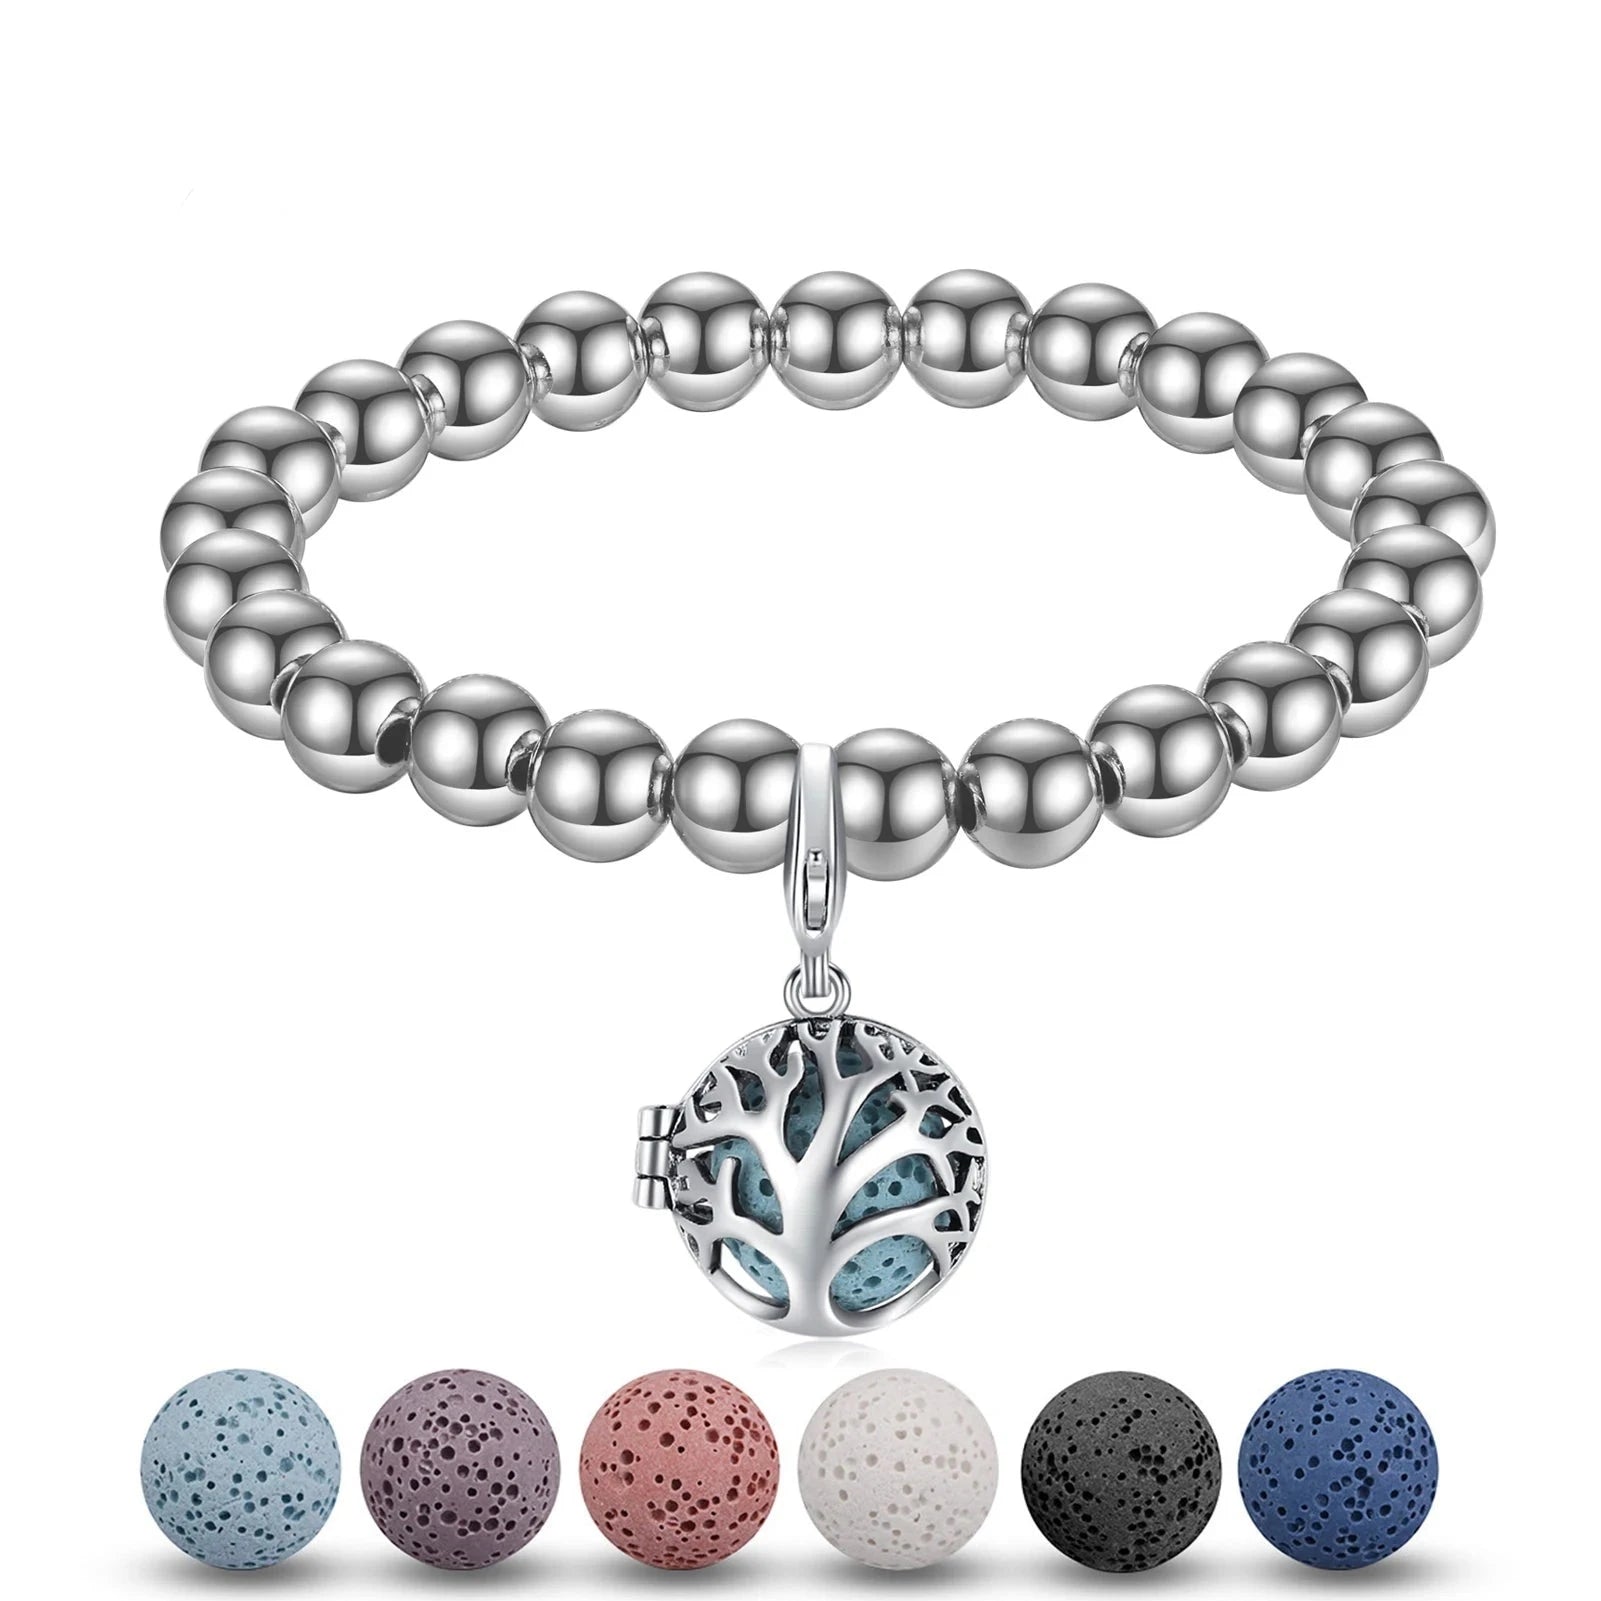 Aromatherapy Cage Diffuser Bracelet With Volcanic Lava Stone Balls